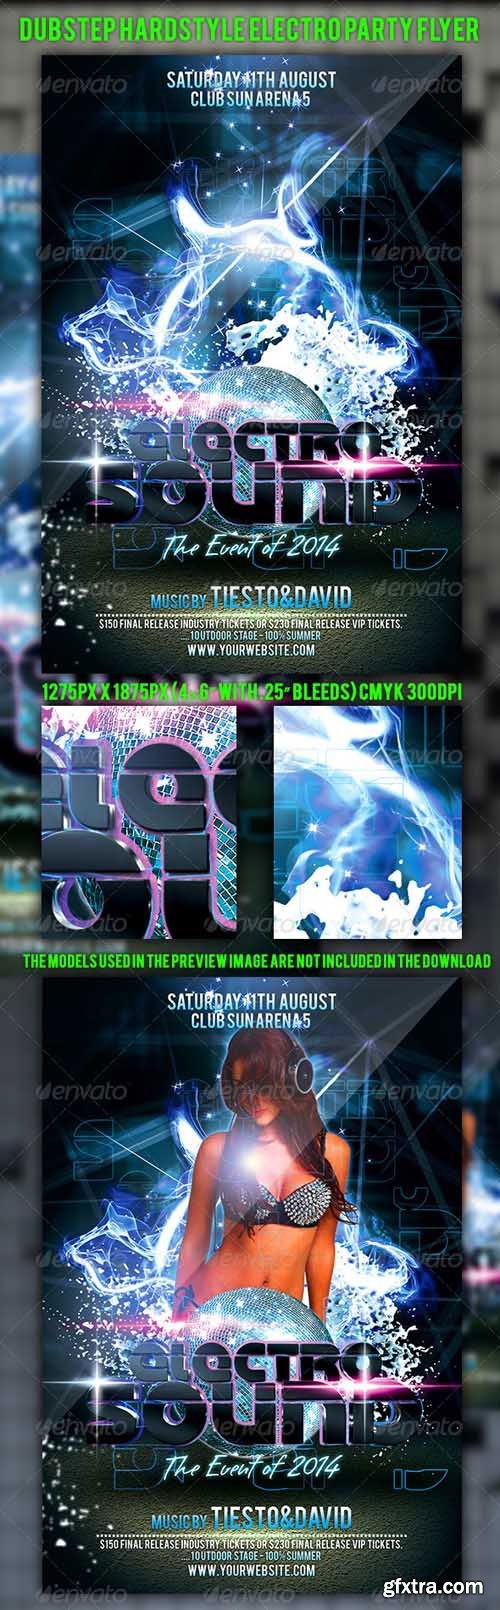 GraphicRiver - Dubstep Hardstyle Electro Party Flyer 5933093